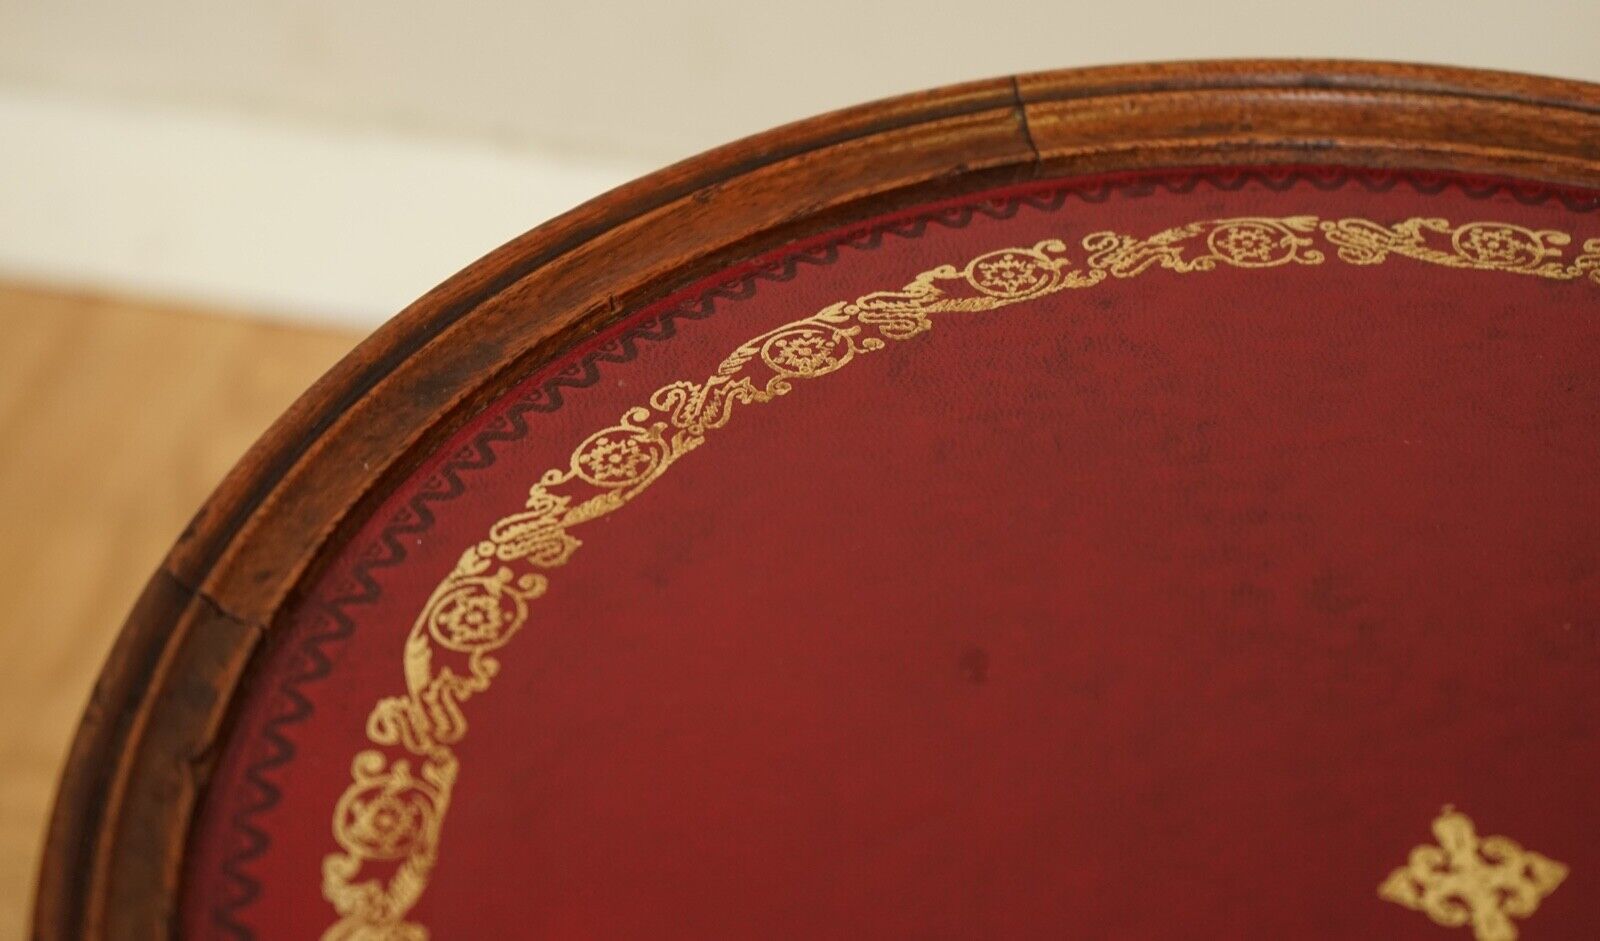 LOVELY VINTAGE SIDE END PLANT SIDE TABLE WITH RED LEATHER EMBOSSED TOP